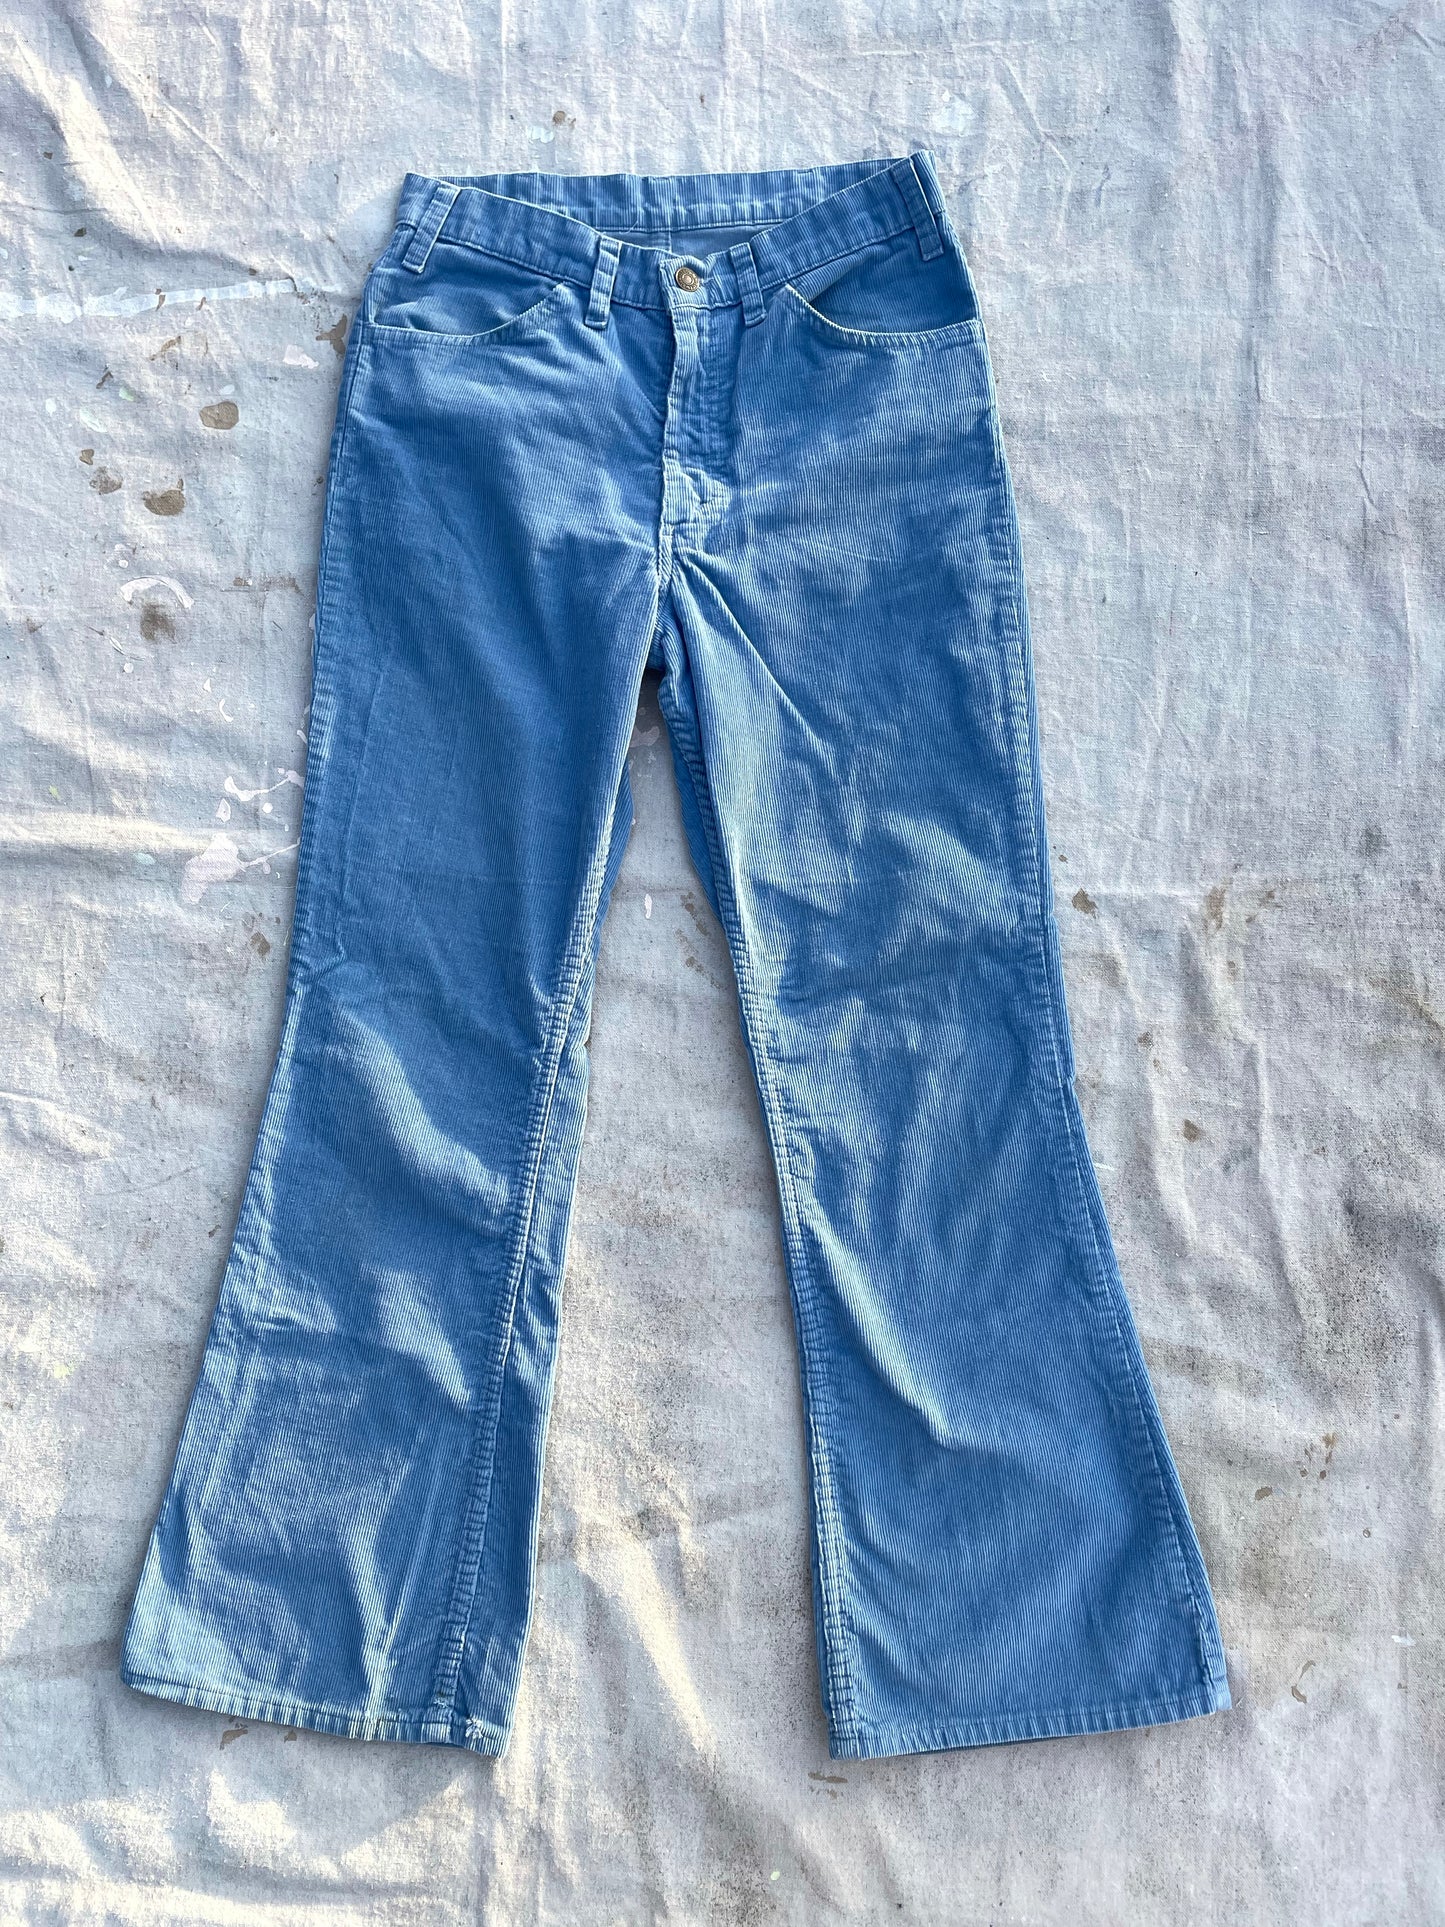 70s Baby Blue Levi’s Corduroy Bell Bottoms